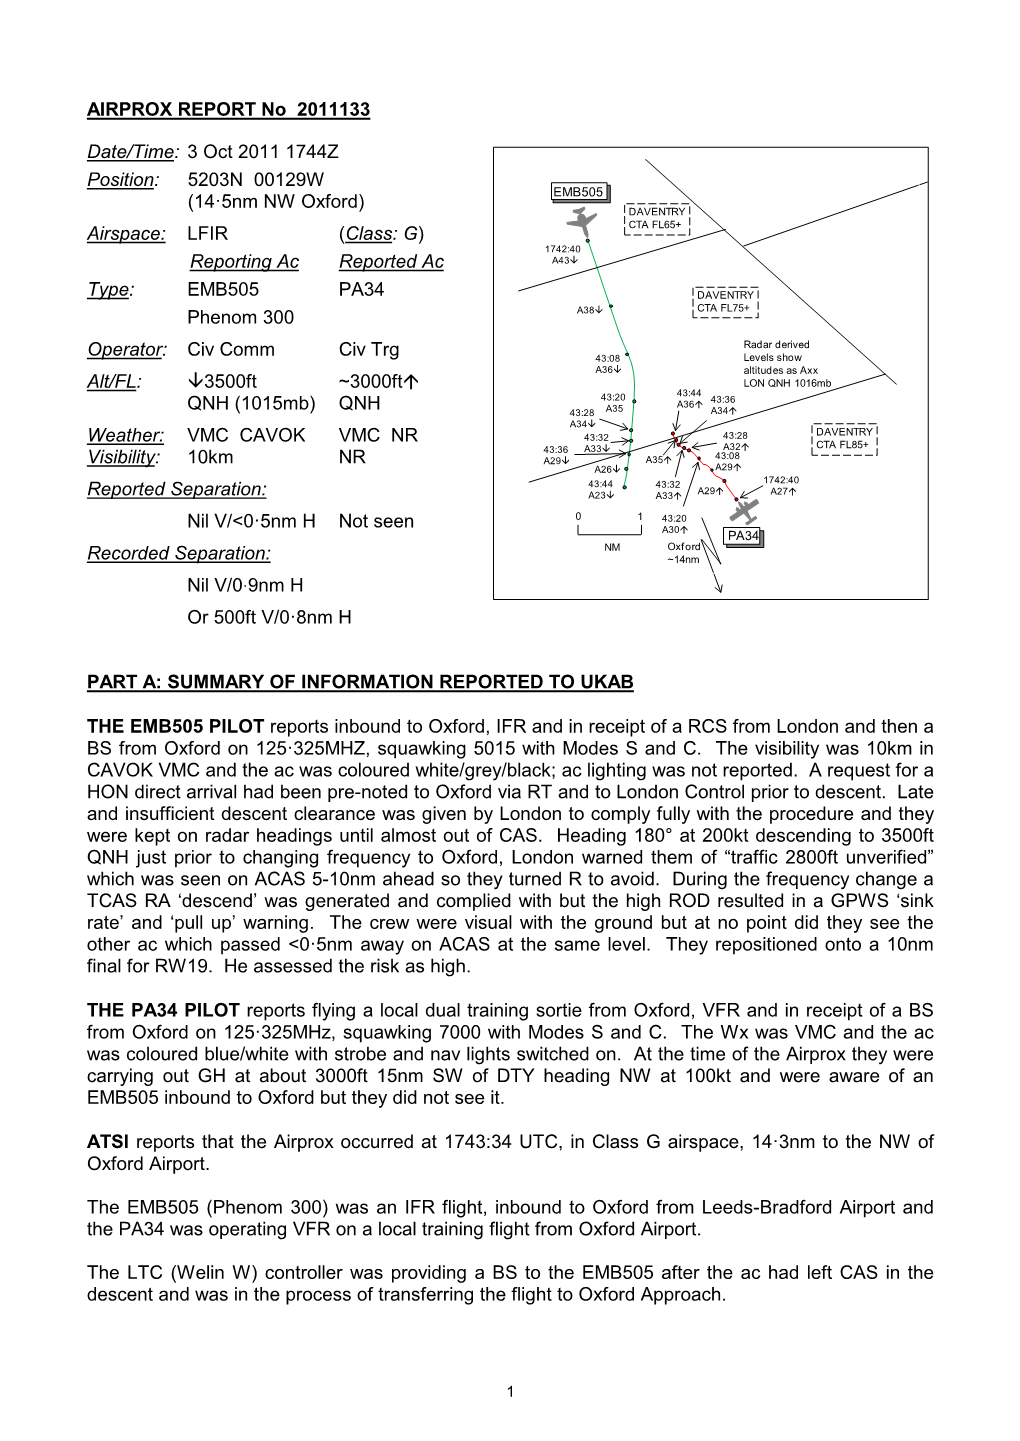 AIRPROX REPORT No 2011133